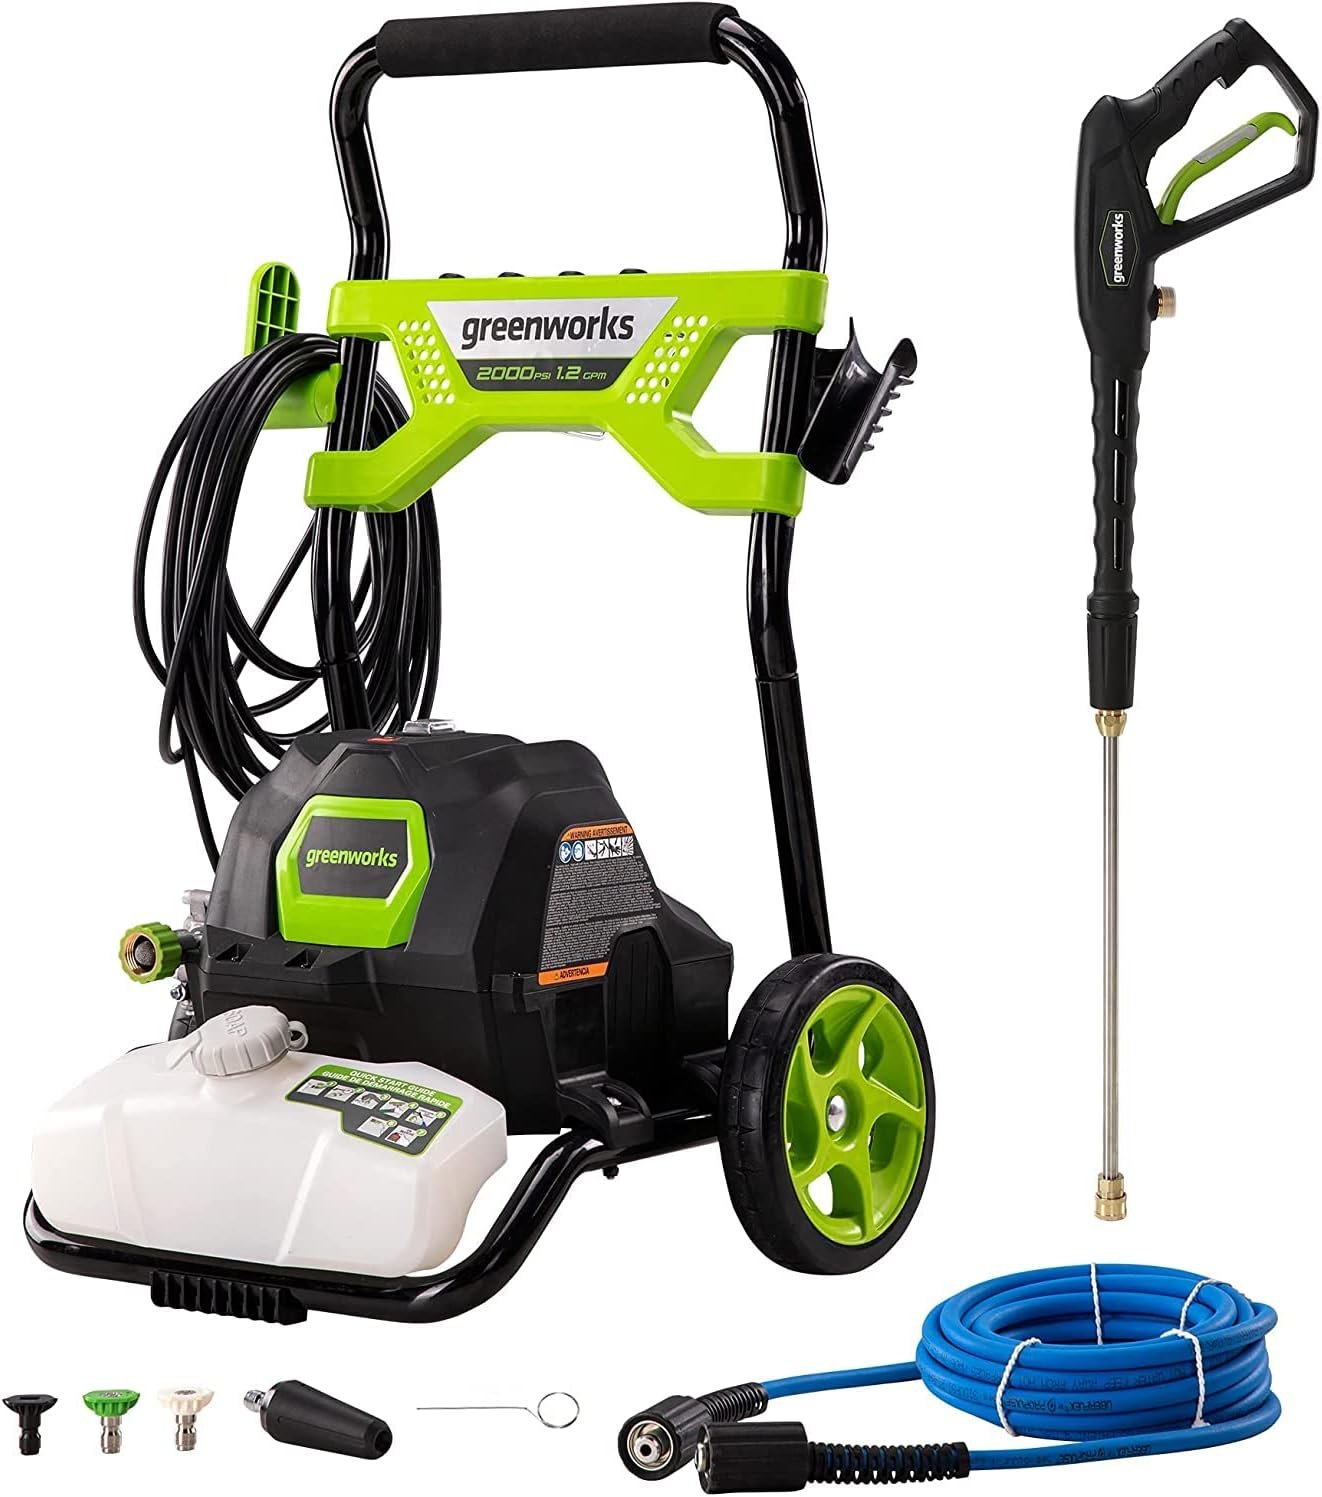 Greenworks 2000 PSI Pressure Washer Review